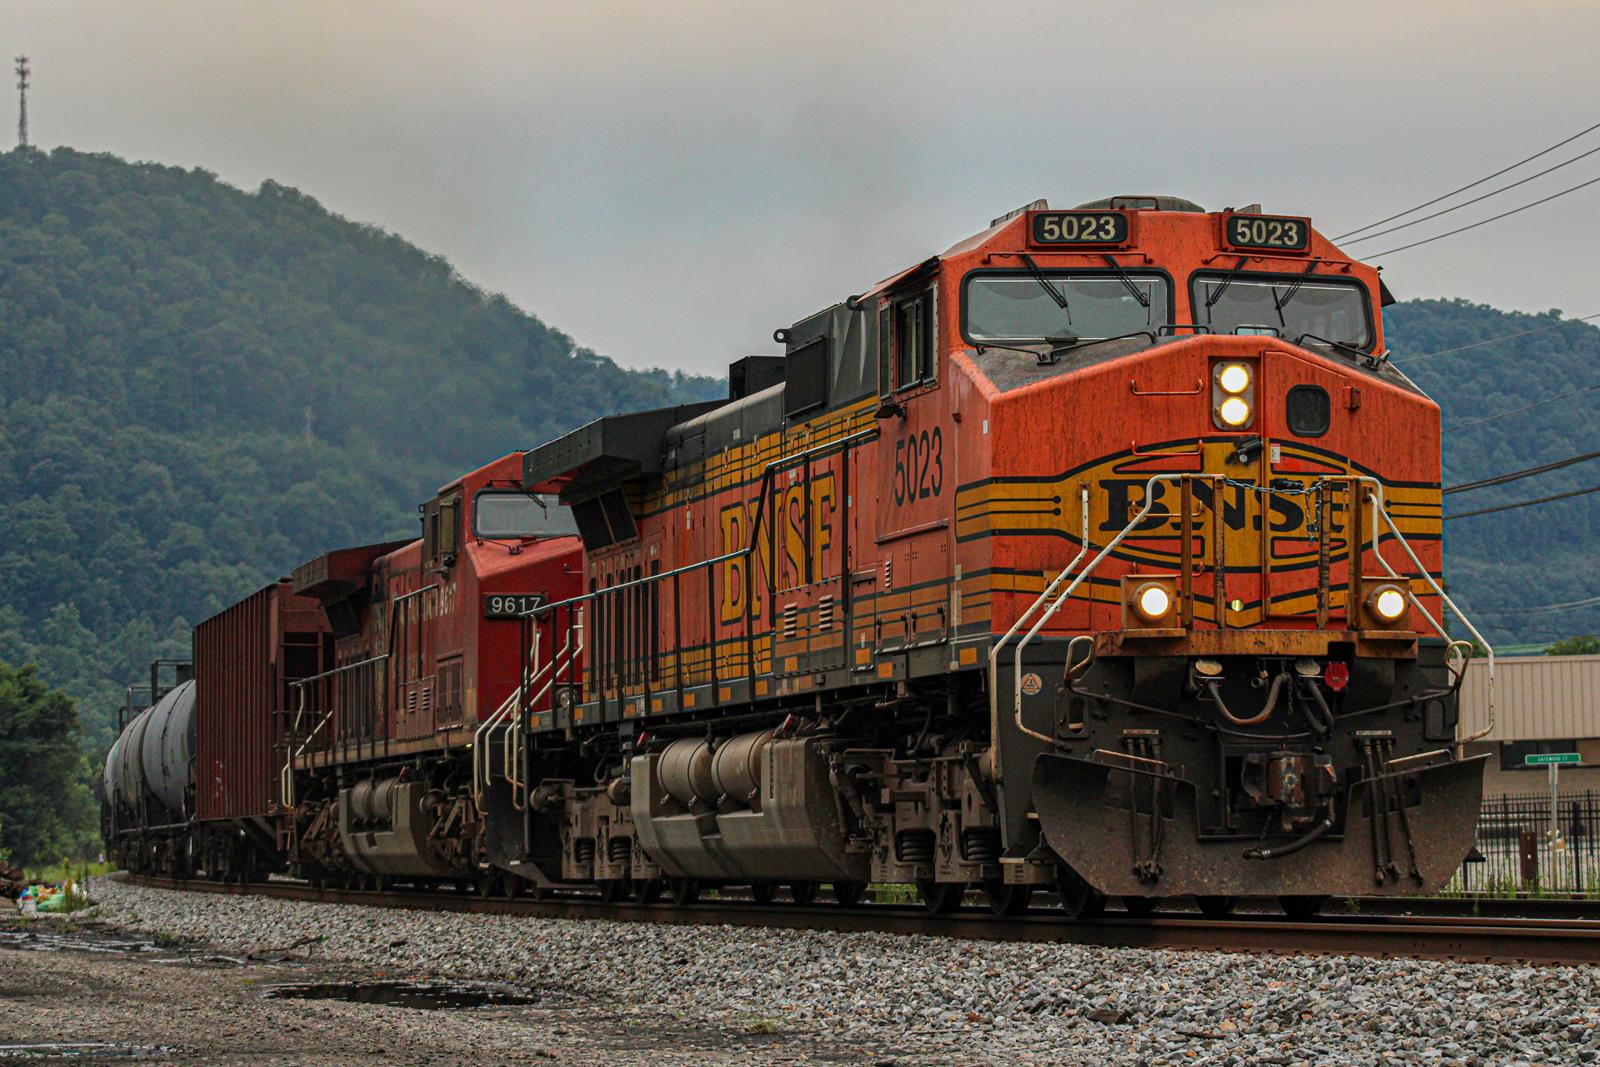 BNSF 5023 is a class C44-9W and  is pictured in Chelyen, West Virginia, USA.  This was taken along the Kanawha Subdivision  on the BNSF Railway. Photo Copyright: Austin  West uploaded to Railroad Gallery on 11/15/2022. This photograph of BNSF 5023 was taken on Saturday, July 30, 2022. All Rights Reserved. 